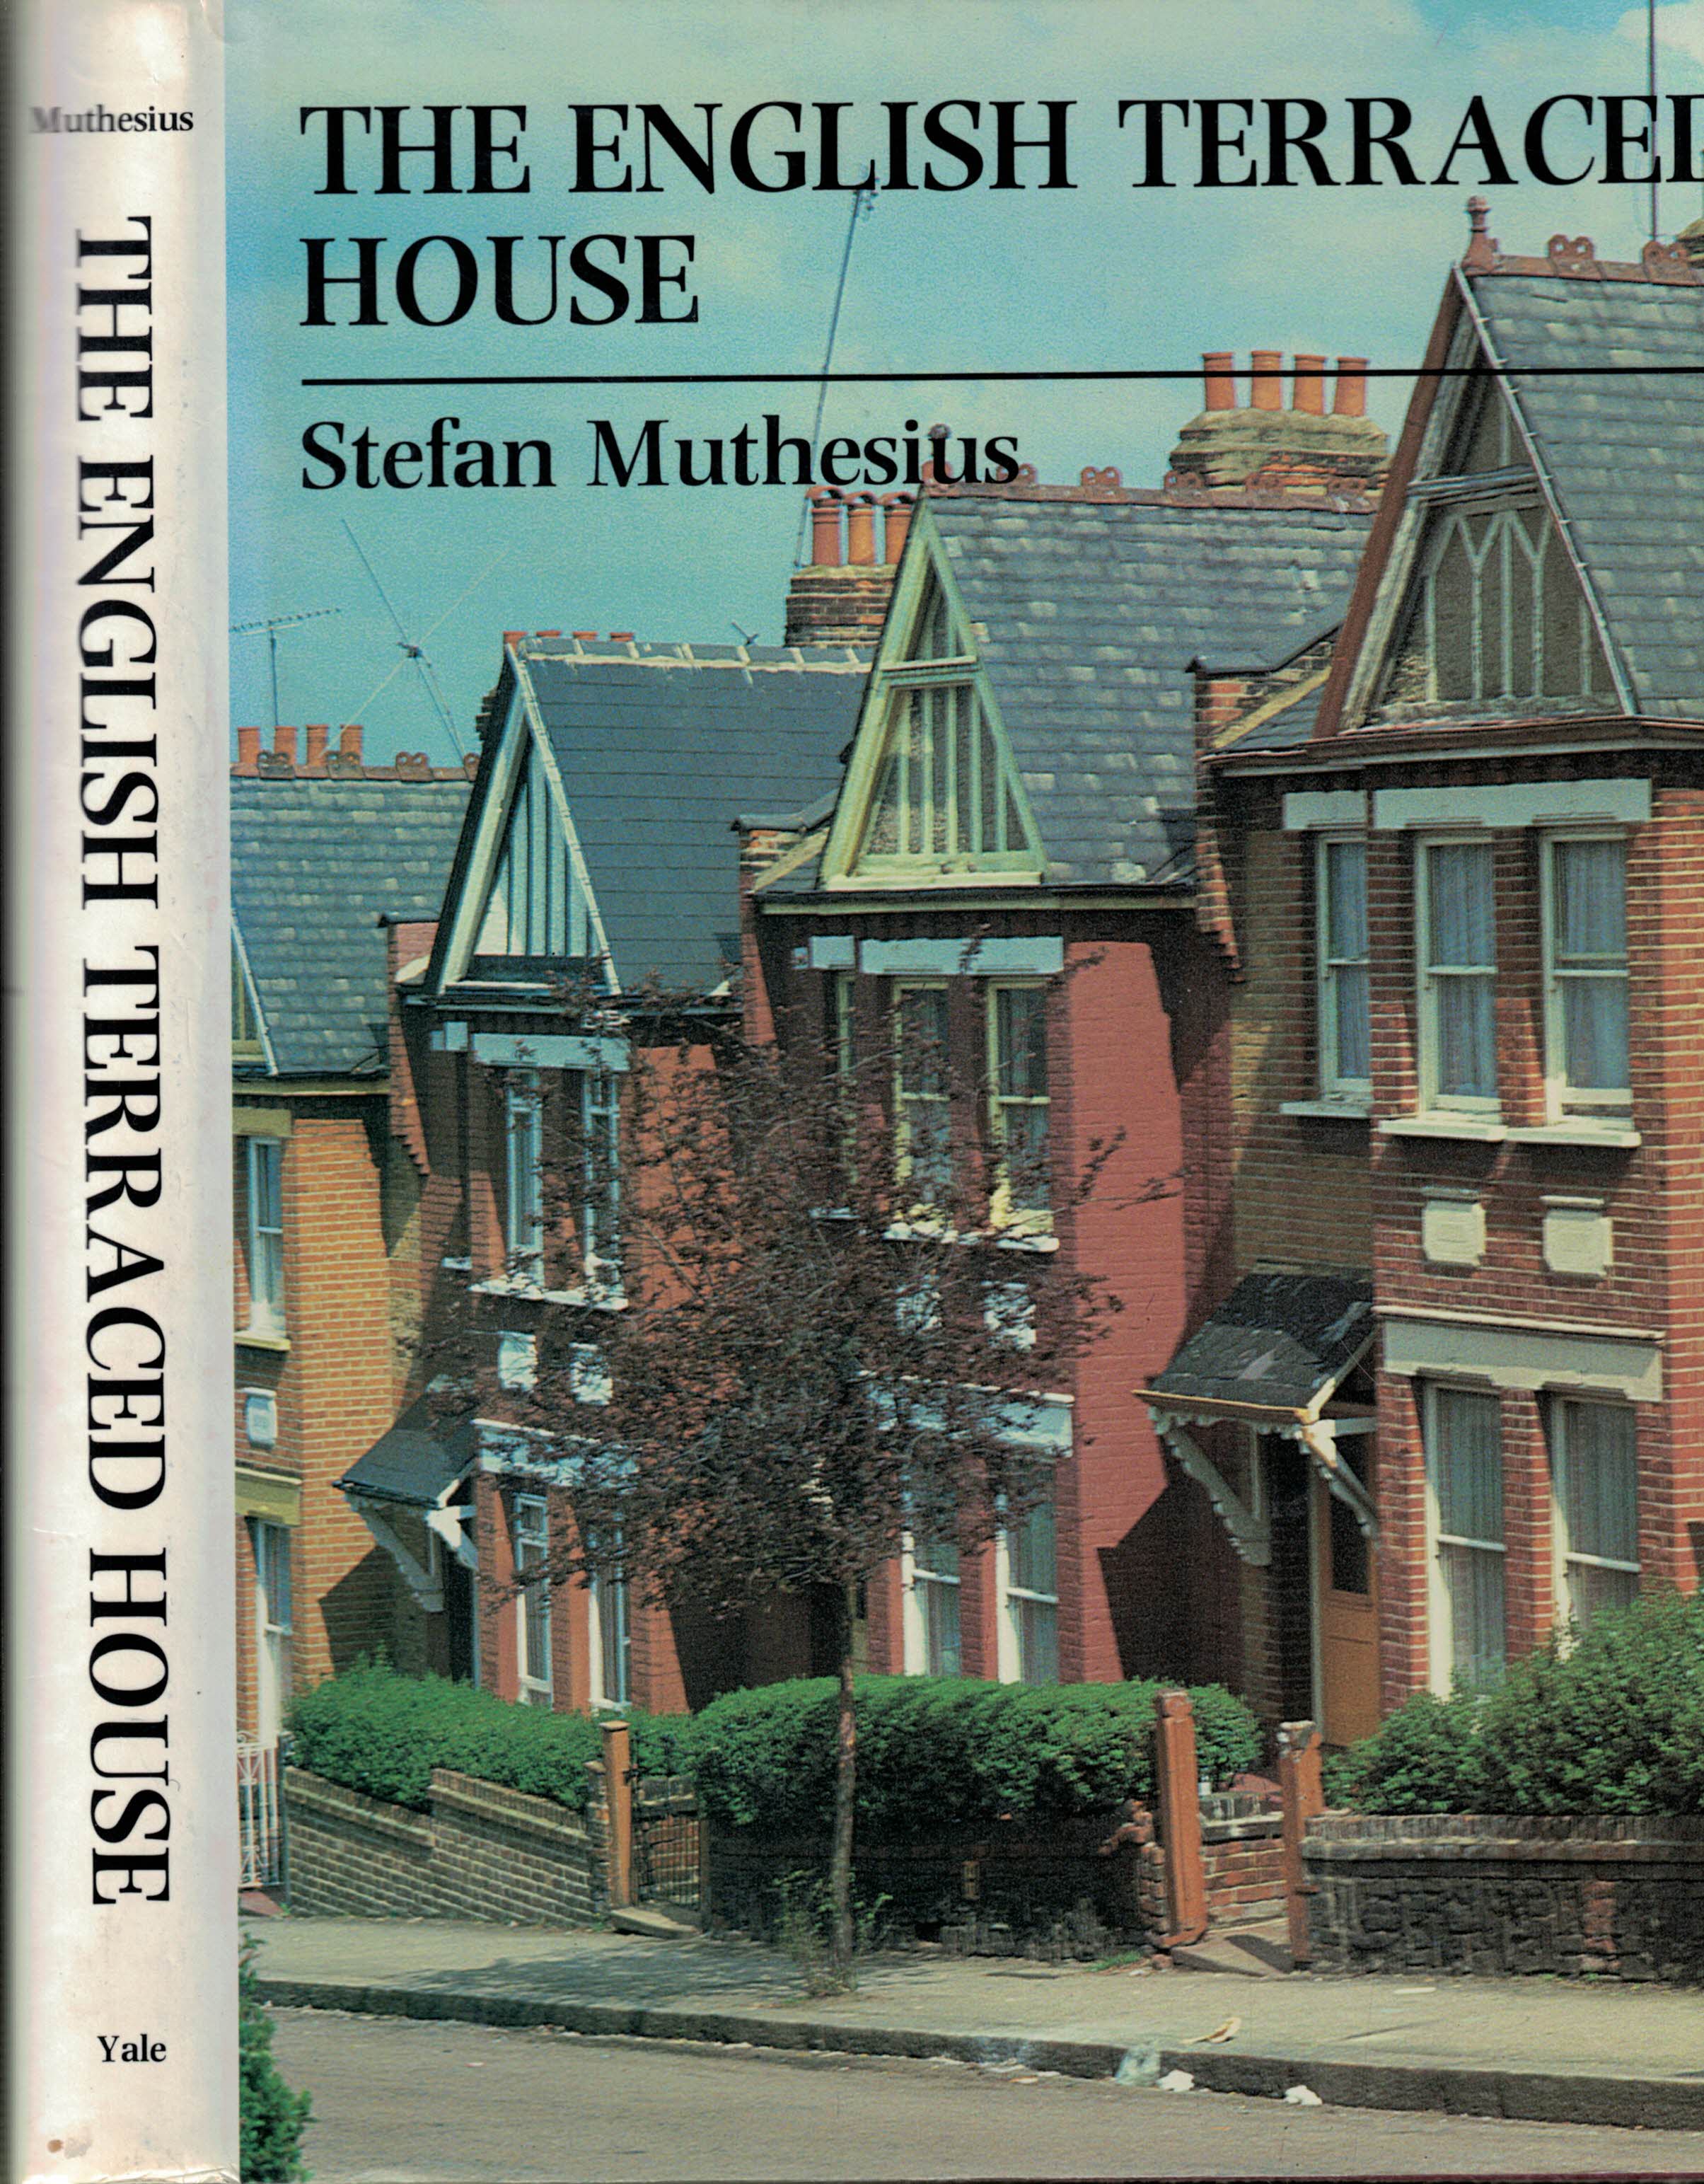 The English Terraced House